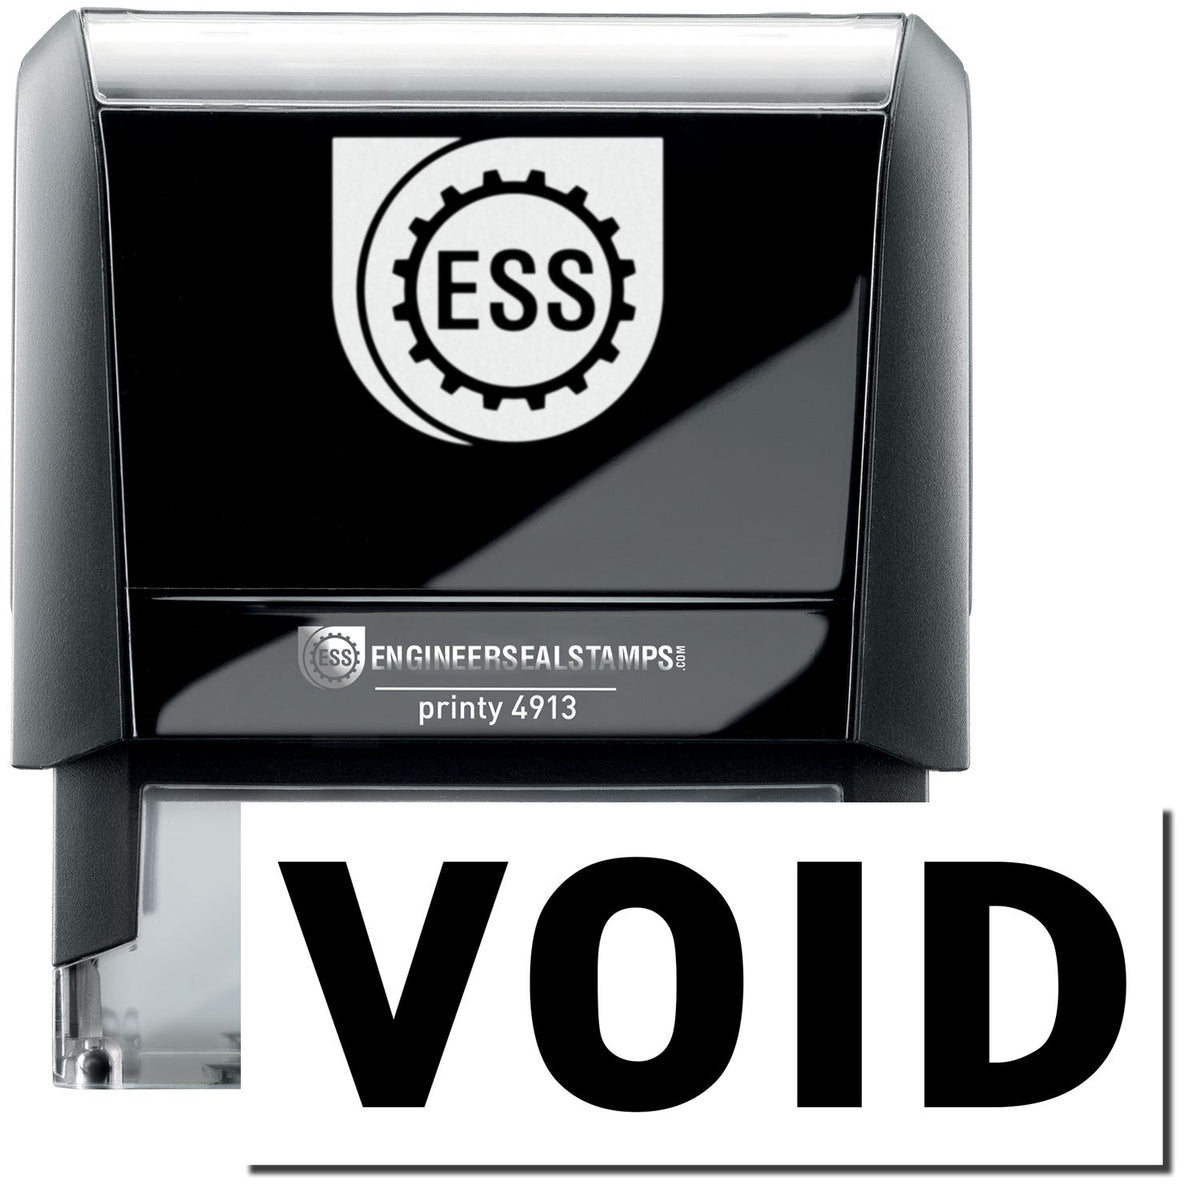 A self-inking stamp with a stamped image showing how the text &quot;VOID&quot; in a large bold font is displayed by it.